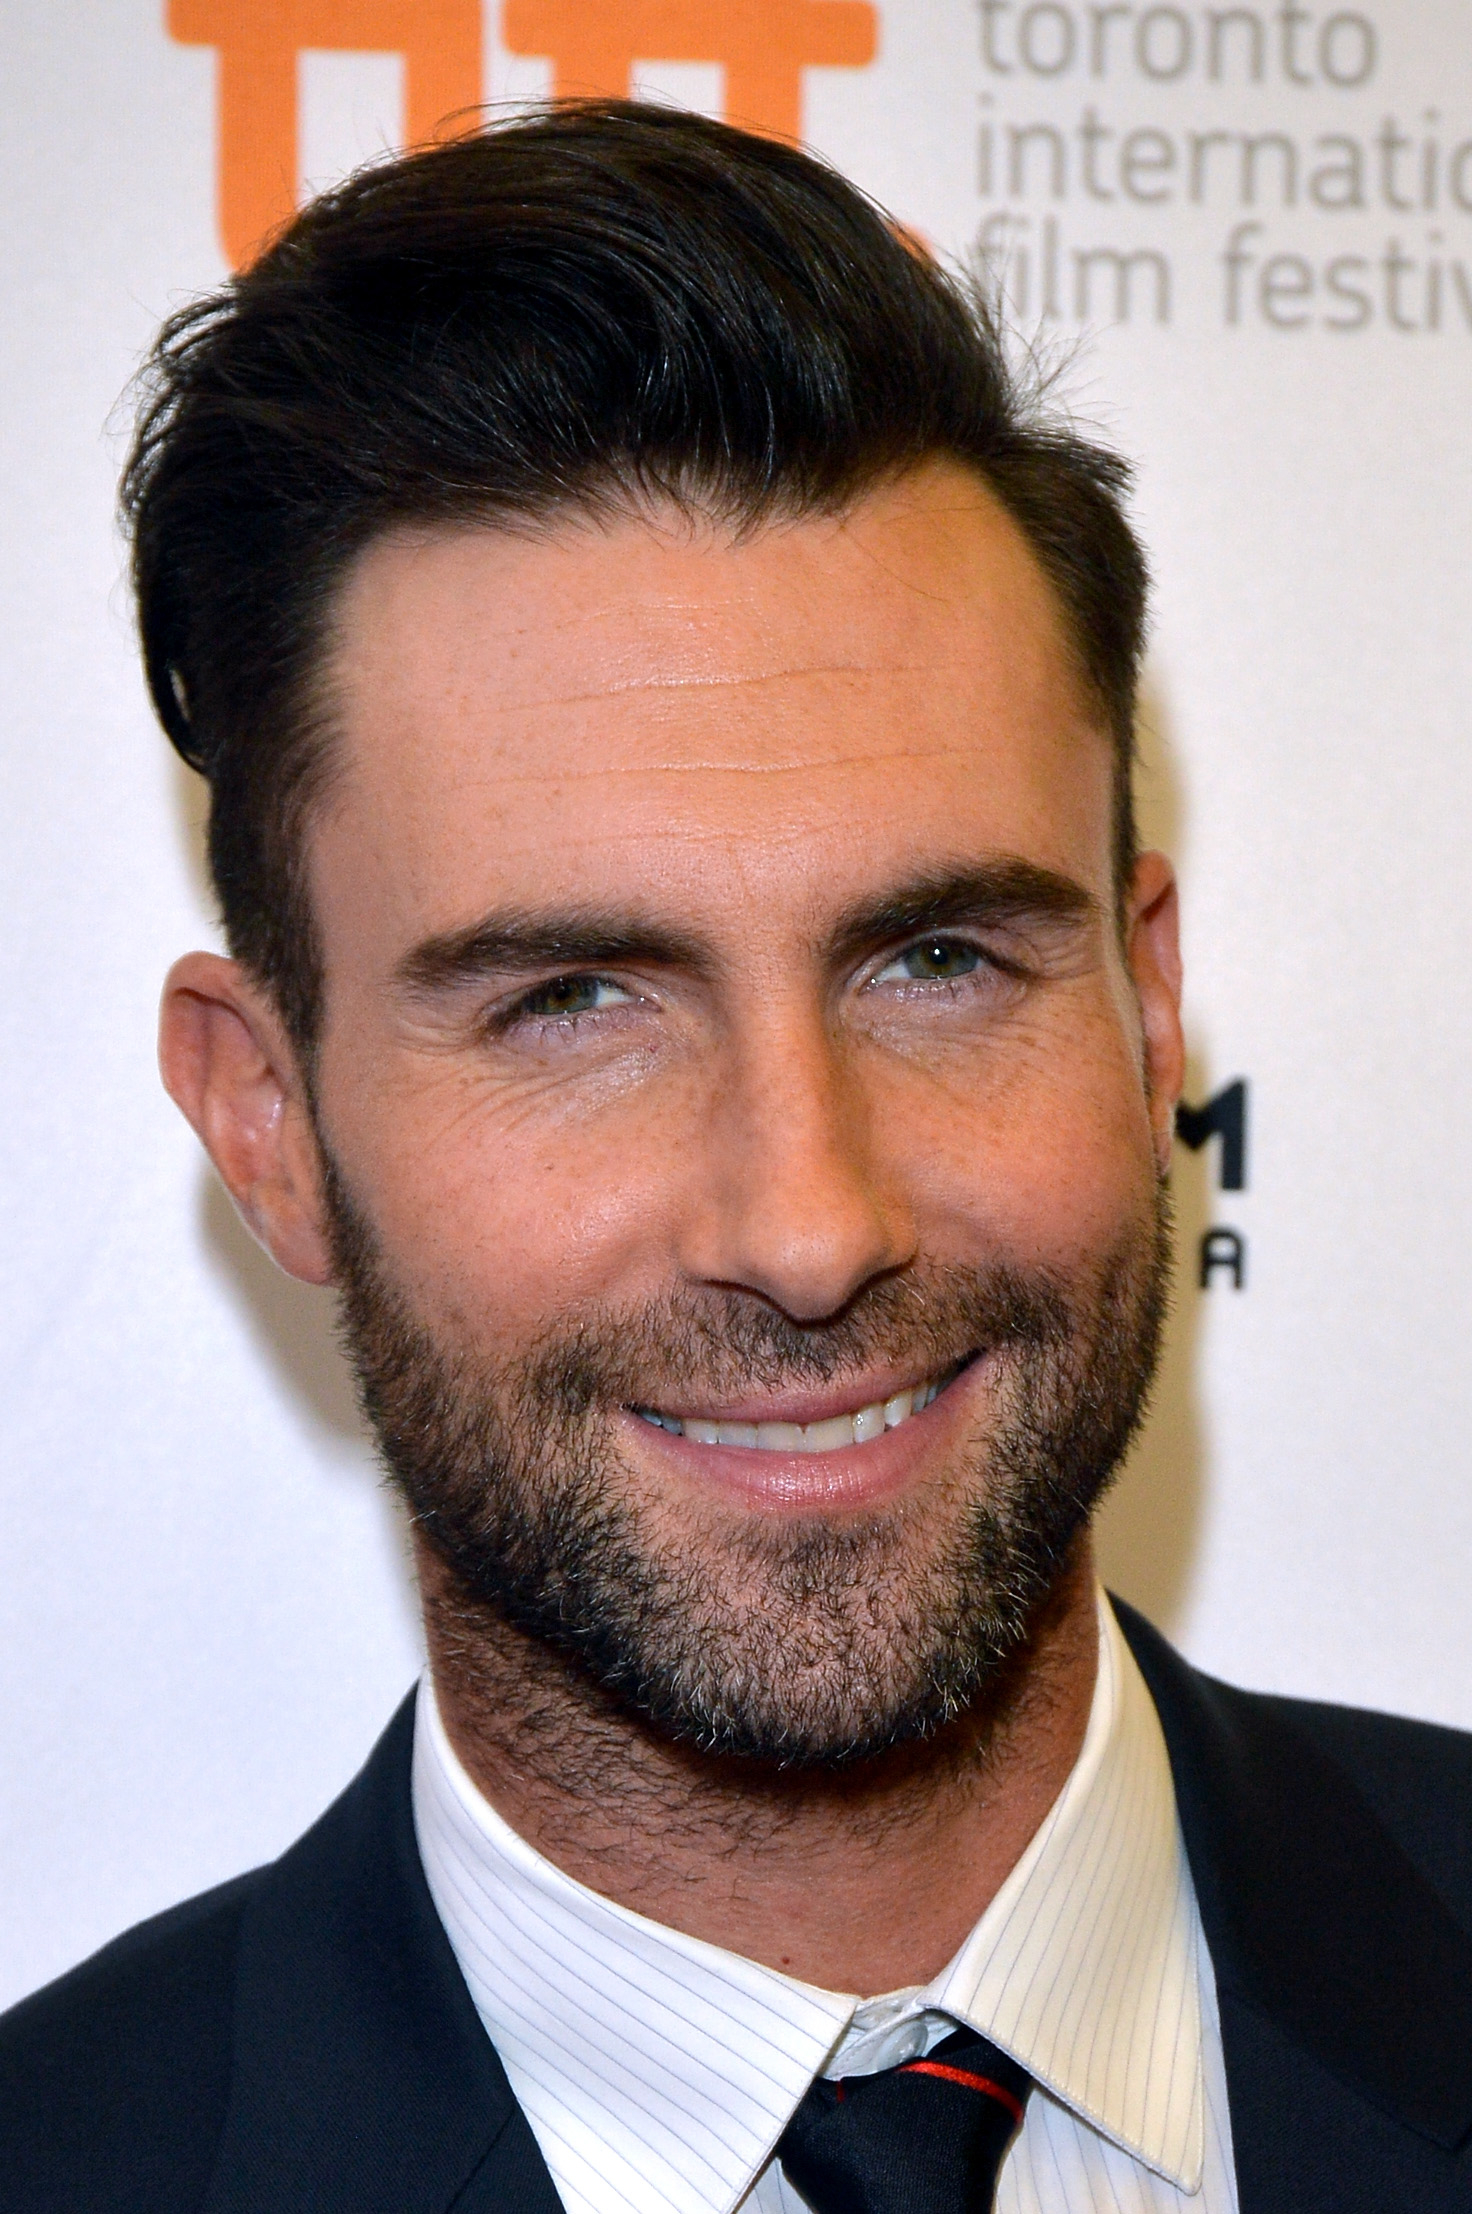 Close-up of Adam smiling in a suit and tie at a media event